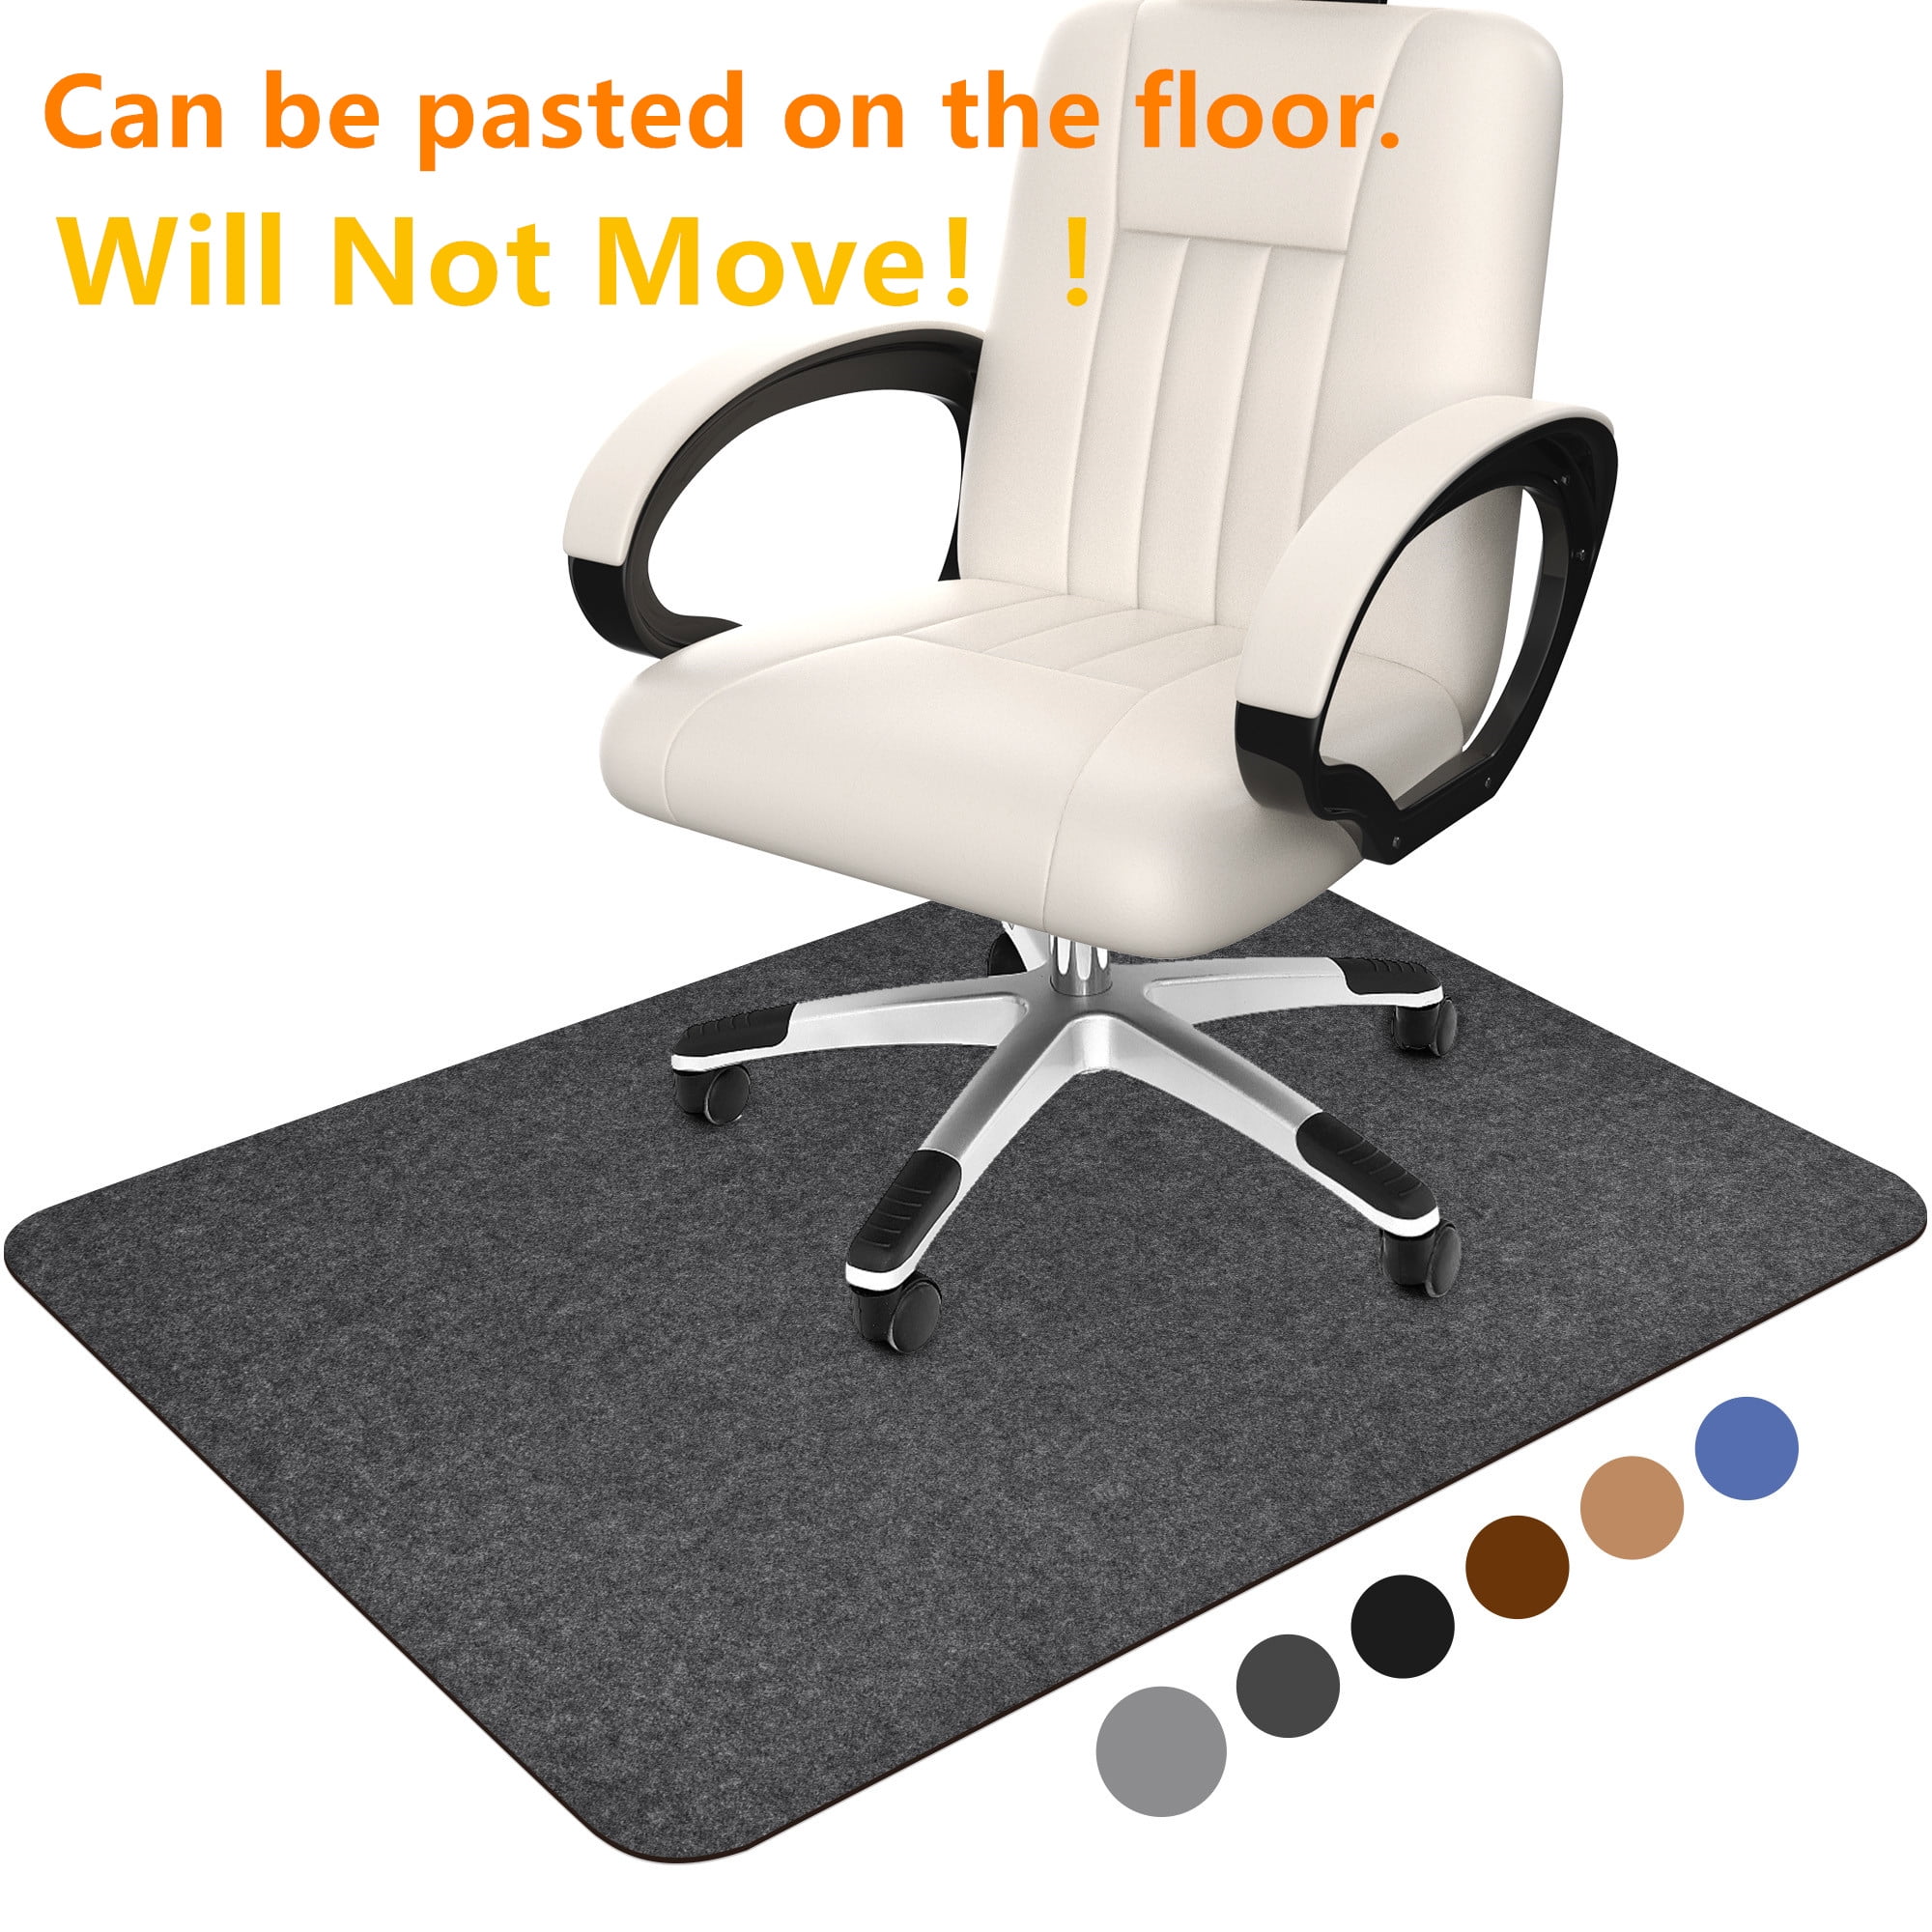 Do You Need A Chair Mat? Reasons You Do For All Flooring Types